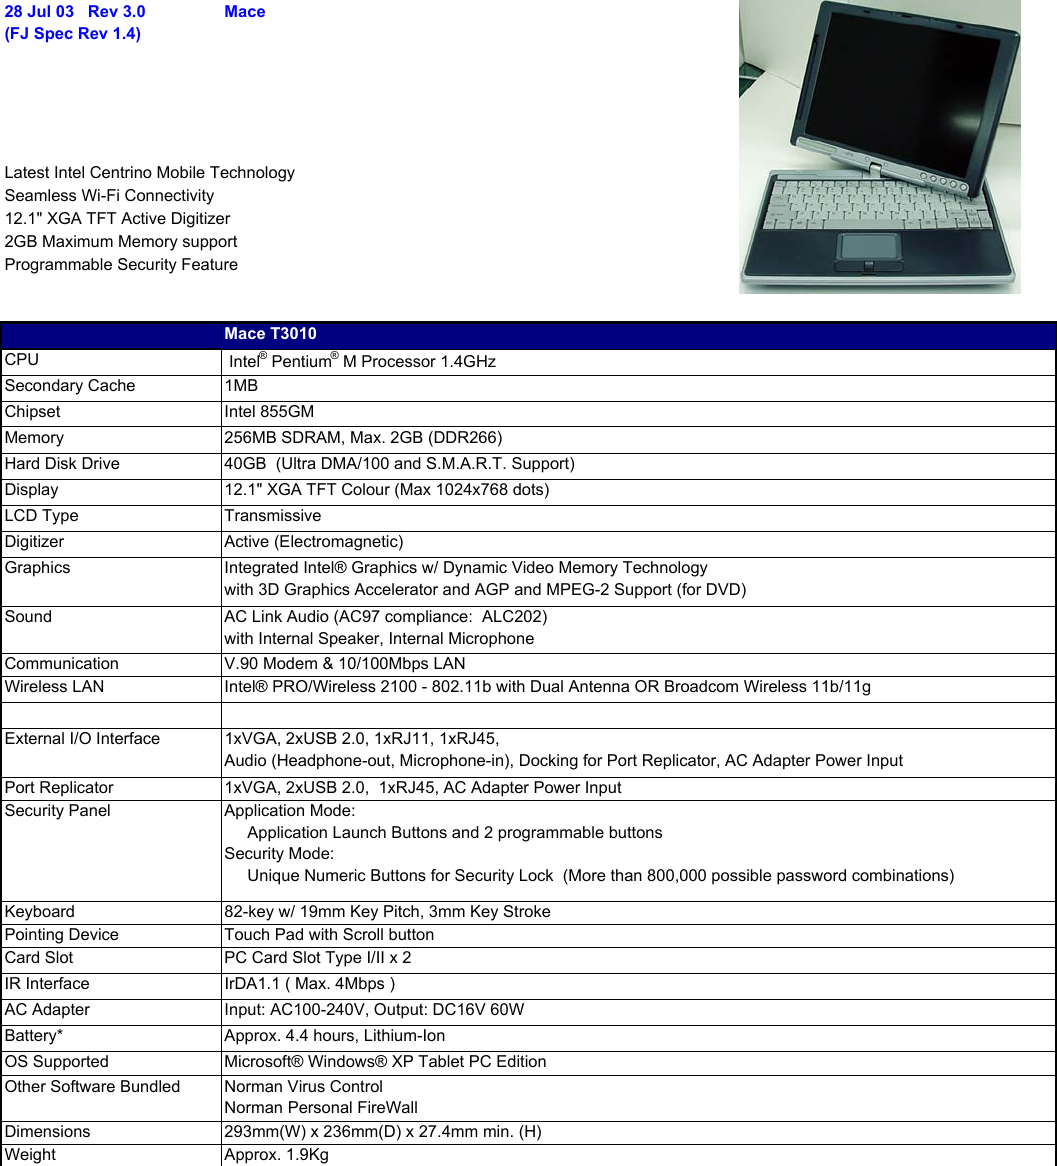 28 Jul 03   Rev 3.0(FJ Spec Rev 1.4)Mace Latest Intel Centrino Mobile TechnologySeamless Wi-Fi Connectivity12.1&quot; XGA TFT Active Digitizer2GB Maximum Memory supportProgrammable Security FeatureMace T3010CPU  Intel® Pentium® M Processor 1.4GHzSecondary Cache 1MBChipset Intel 855GMMemory 256MB SDRAM, Max. 2GB (DDR266)Hard Disk Drive 40GB  (Ultra DMA/100 and S.M.A.R.T. Support)Display 12.1&quot; XGA TFT Colour (Max 1024x768 dots)LCD Type TransmissiveDigitizer Active (Electromagnetic)Graphics Integrated Intel® Graphics w/ Dynamic Video Memory Technologywith 3D Graphics Accelerator and AGP and MPEG-2 Support (for DVD)Sound AC Link Audio (AC97 compliance:  ALC202)with Internal Speaker, Internal MicrophoneCommunication V.90 Modem &amp; 10/100Mbps LANWireless LAN Intel® PRO/Wireless 2100 - 802.11b with Dual Antenna OR Broadcom Wireless 11b/11gExternal I/O Interface 1xVGA, 2xUSB 2.0, 1xRJ11, 1xRJ45, Audio (Headphone-out, Microphone-in), Docking for Port Replicator, AC Adapter Power InputPort Replicator 1xVGA, 2xUSB 2.0,  1xRJ45, AC Adapter Power InputSecurity Panel Application Mode:     Application Launch Buttons and 2 programmable buttonsSecurity Mode:     Unique Numeric Buttons for Security Lock  (More than 800,000 possible password combinations)Keyboard 82-key w/ 19mm Key Pitch, 3mm Key StrokePointing Device Touch Pad with Scroll buttonCard Slot PC Card Slot Type I/II x 2IR Interface IrDA1.1 ( Max. 4Mbps )AC Adapter Input: AC100-240V, Output: DC16V 60WBattery* Approx. 4.4 hours, Lithium-IonOS Supported Microsoft® Windows® XP Tablet PC EditionOther Software Bundled Norman Virus Control Norman Personal FireWallDimensions 293mm(W) x 236mm(D) x 27.4mm min. (H)Weight Approx. 1.9Kg